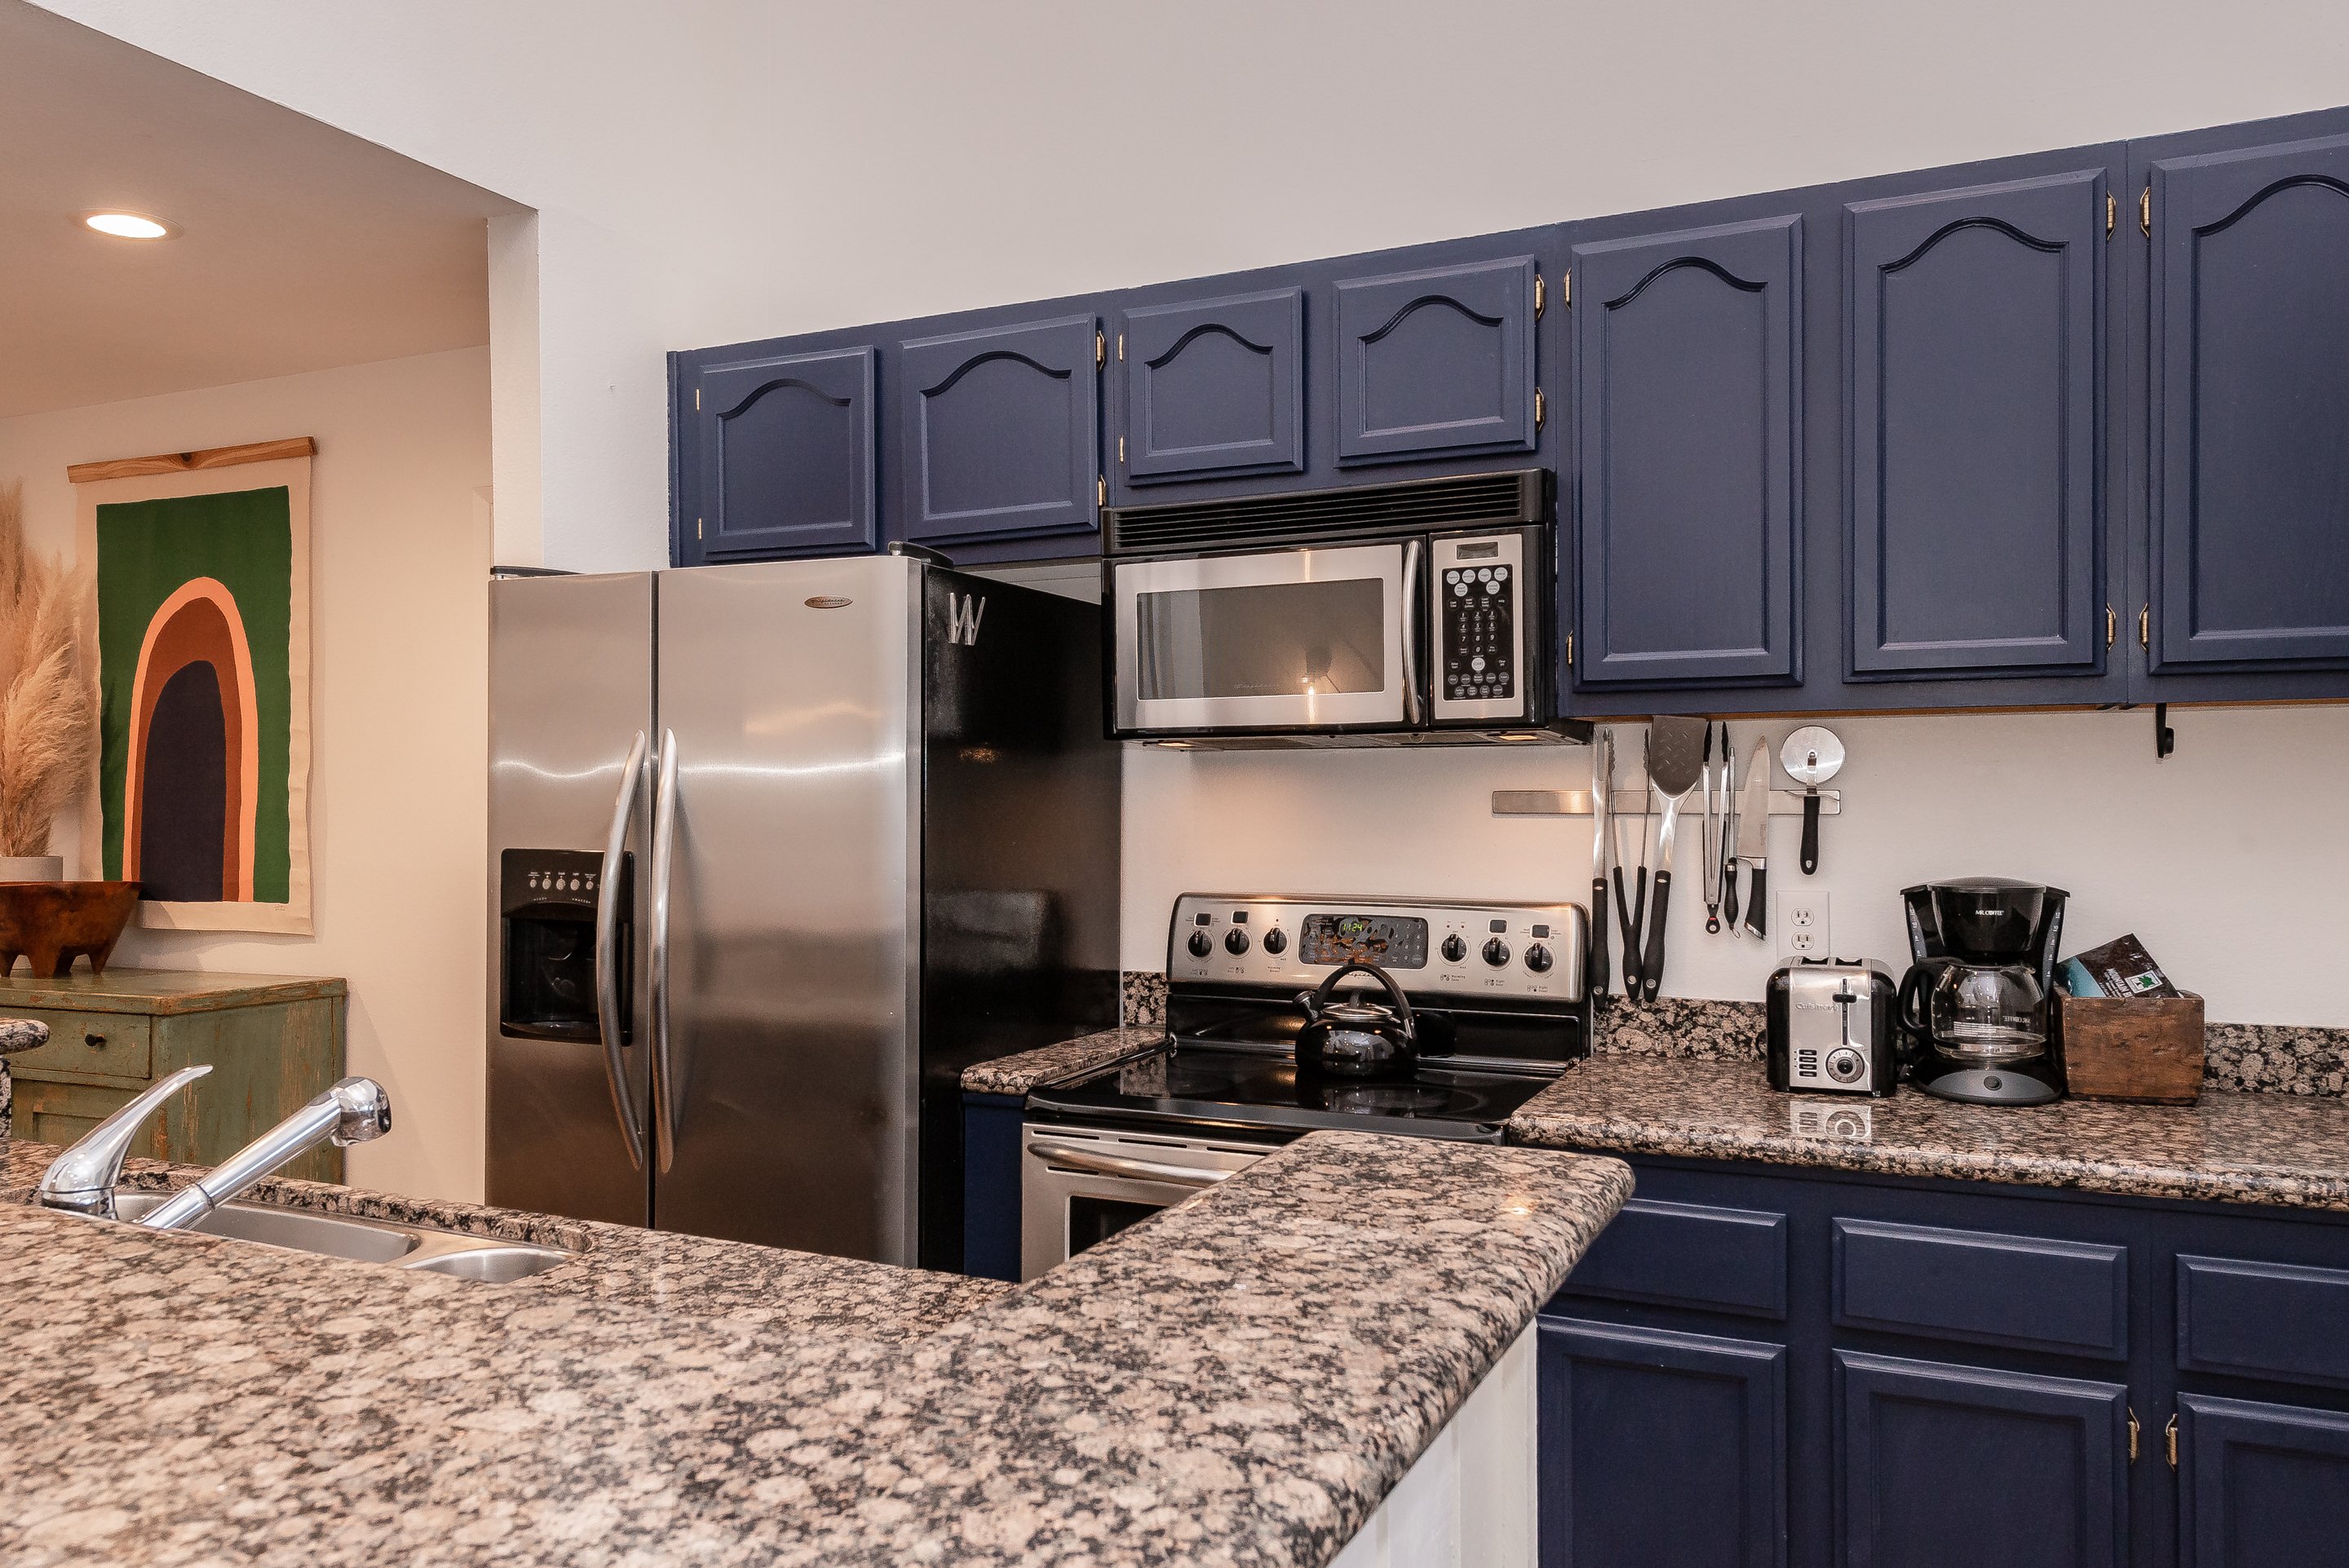 Fully Equipped Kitchen, Granite Counters, Stainless Steel Appliances